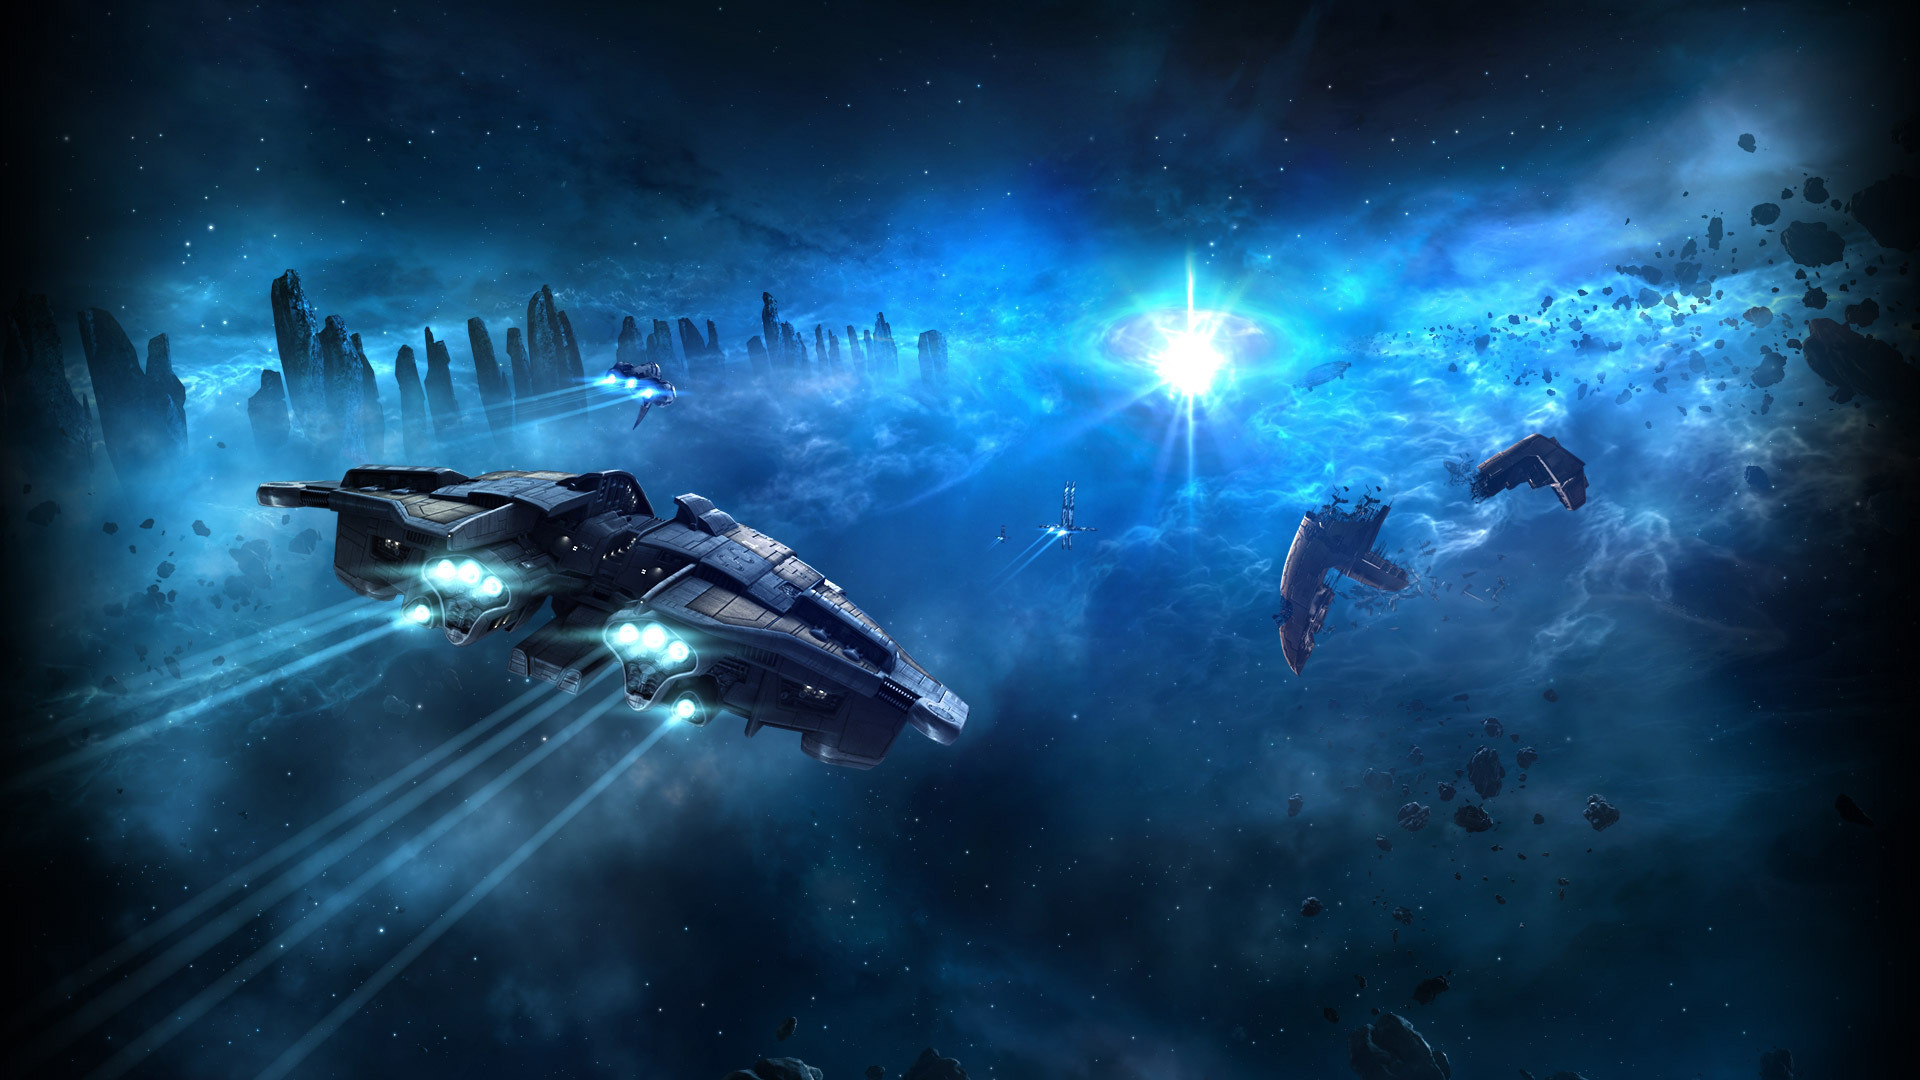 eve online wallpaper,strategy video game,action adventure game,space,outer space,spacecraft